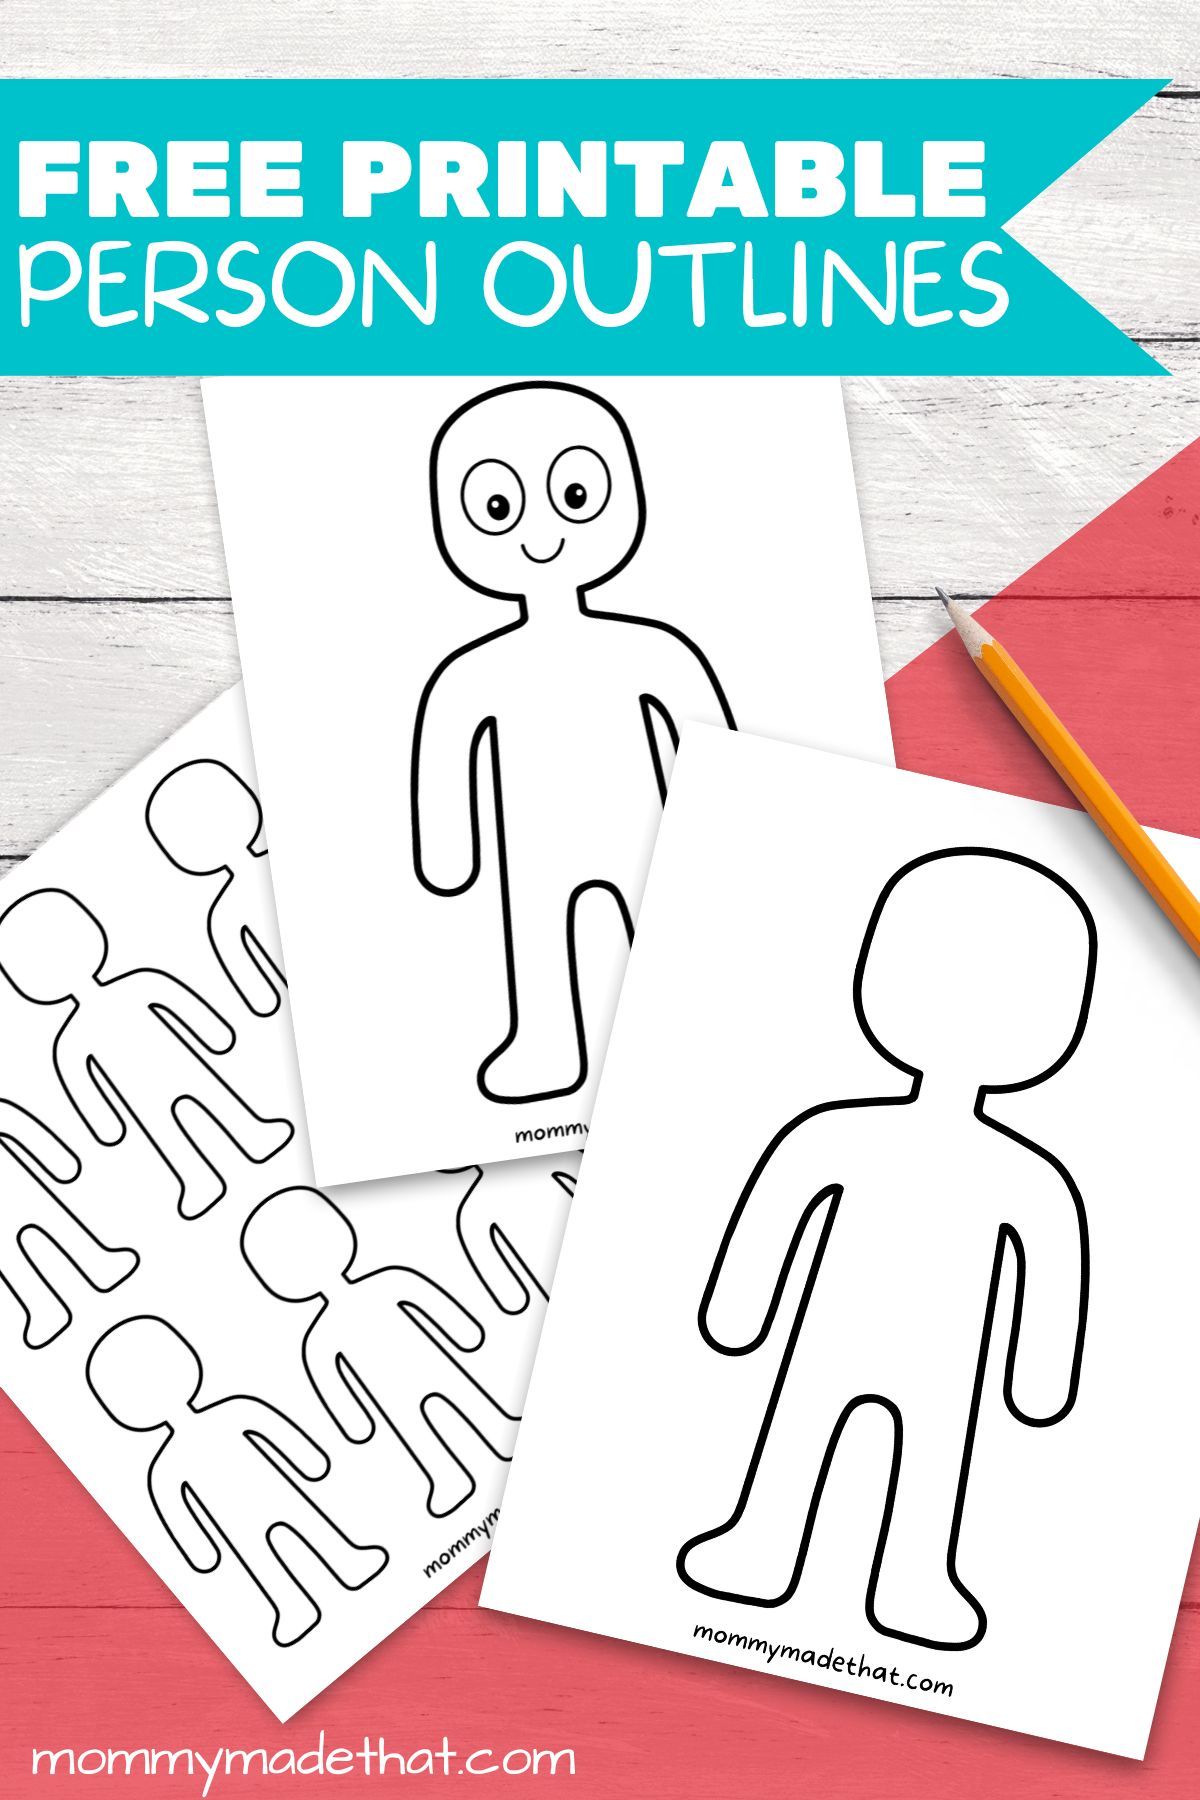 Person Outline and Templates (Lots of Free Printables!)